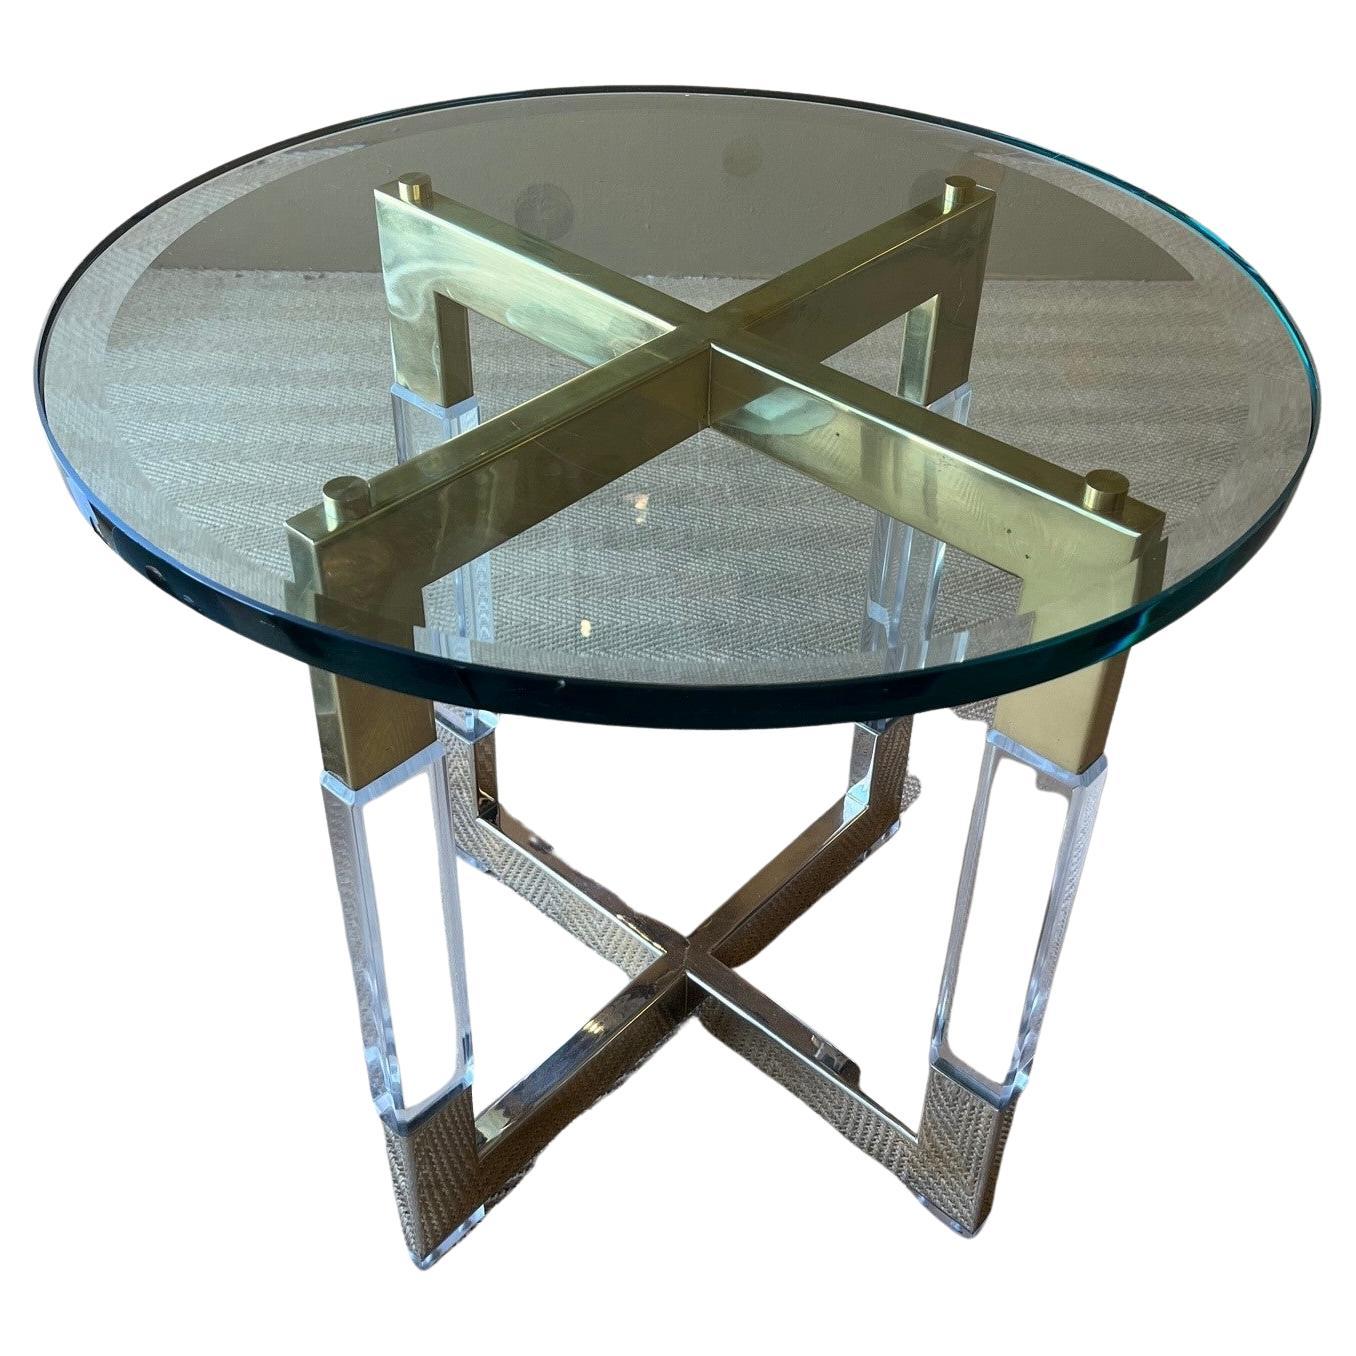 Vintage Acrylic Brass Nickle Side Table with a Glass Top by Charles Hollis Jones